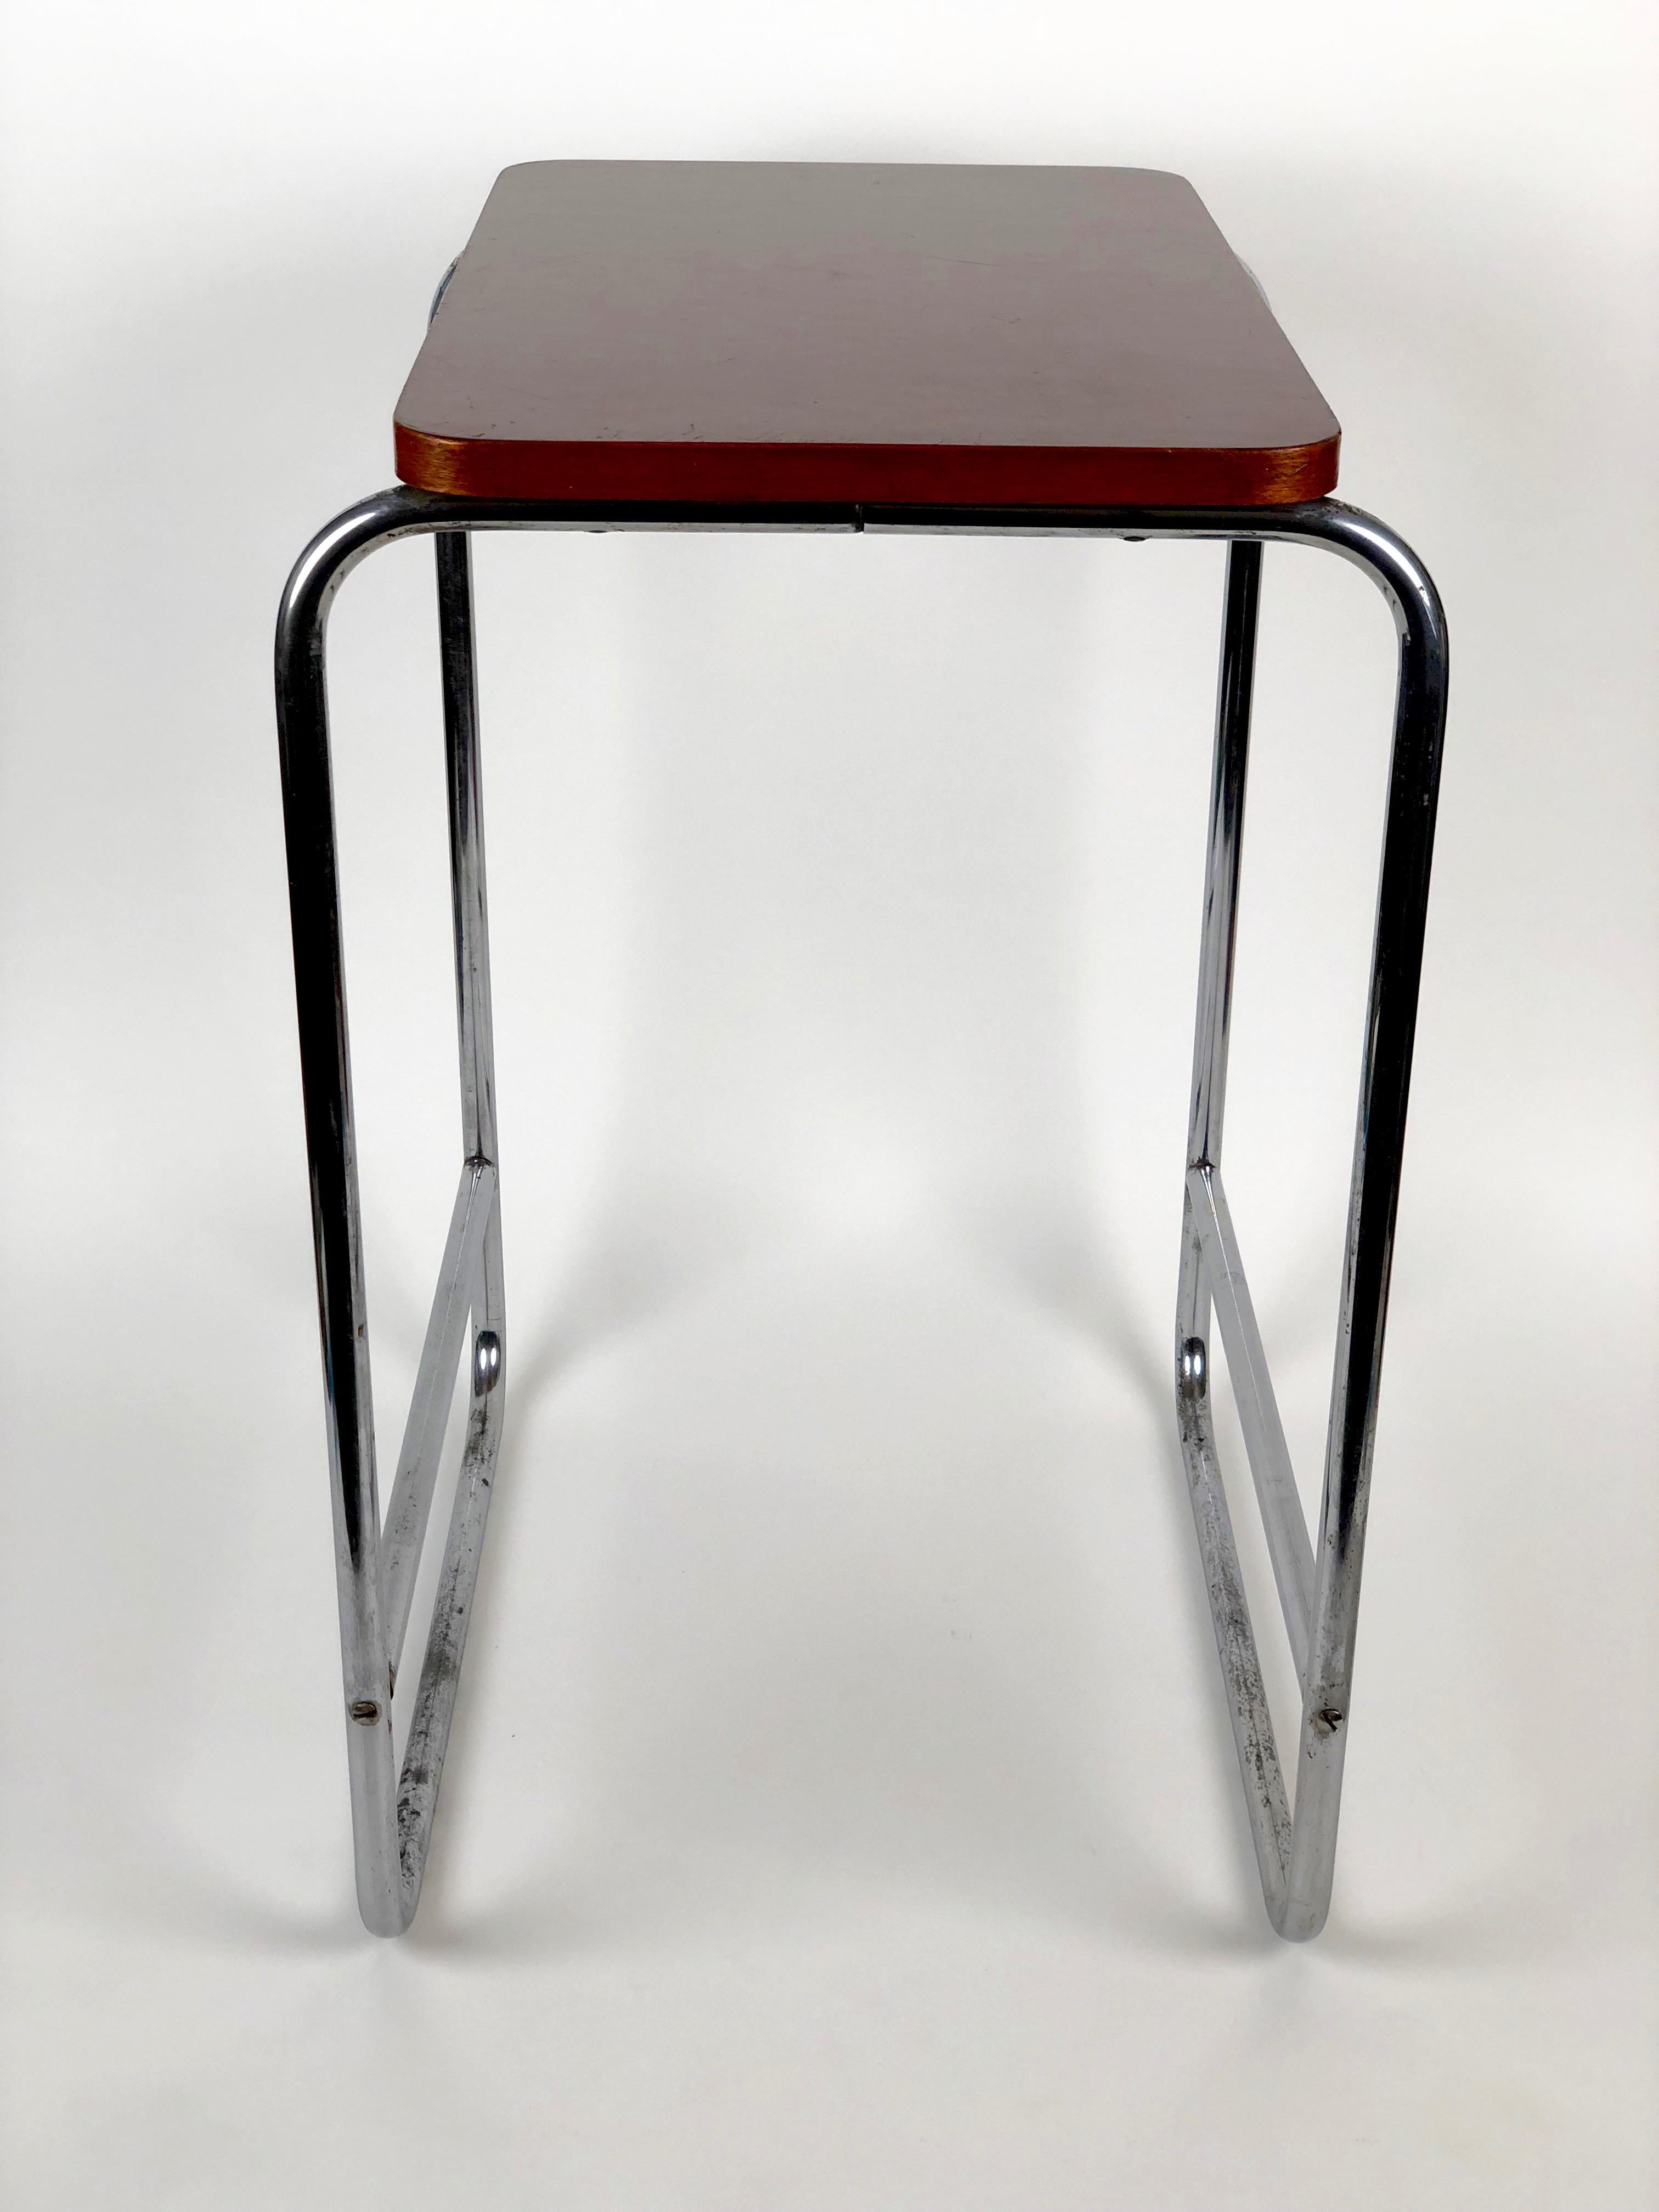 Made in the 1930s, this table is composed of a steel tube base that has been chrome-plated, the top is made of wood with a bakelite
laminate surface. The bakelite is in very good condition and still maintains its original shinny surface. The chrome